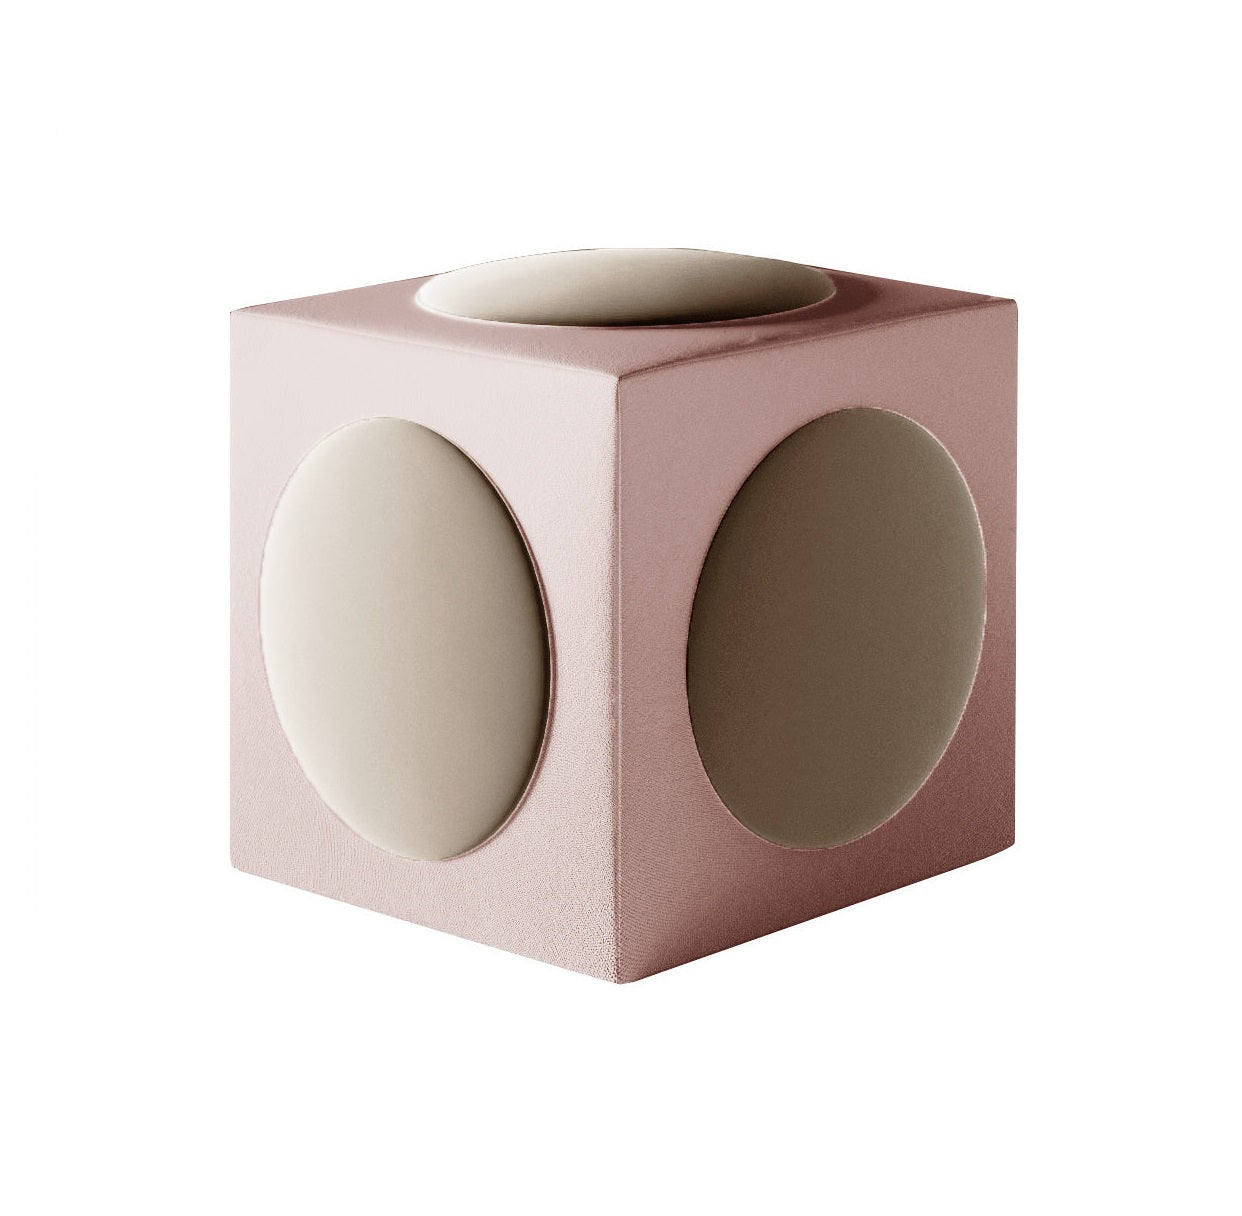 CACKO pouf brown with pink